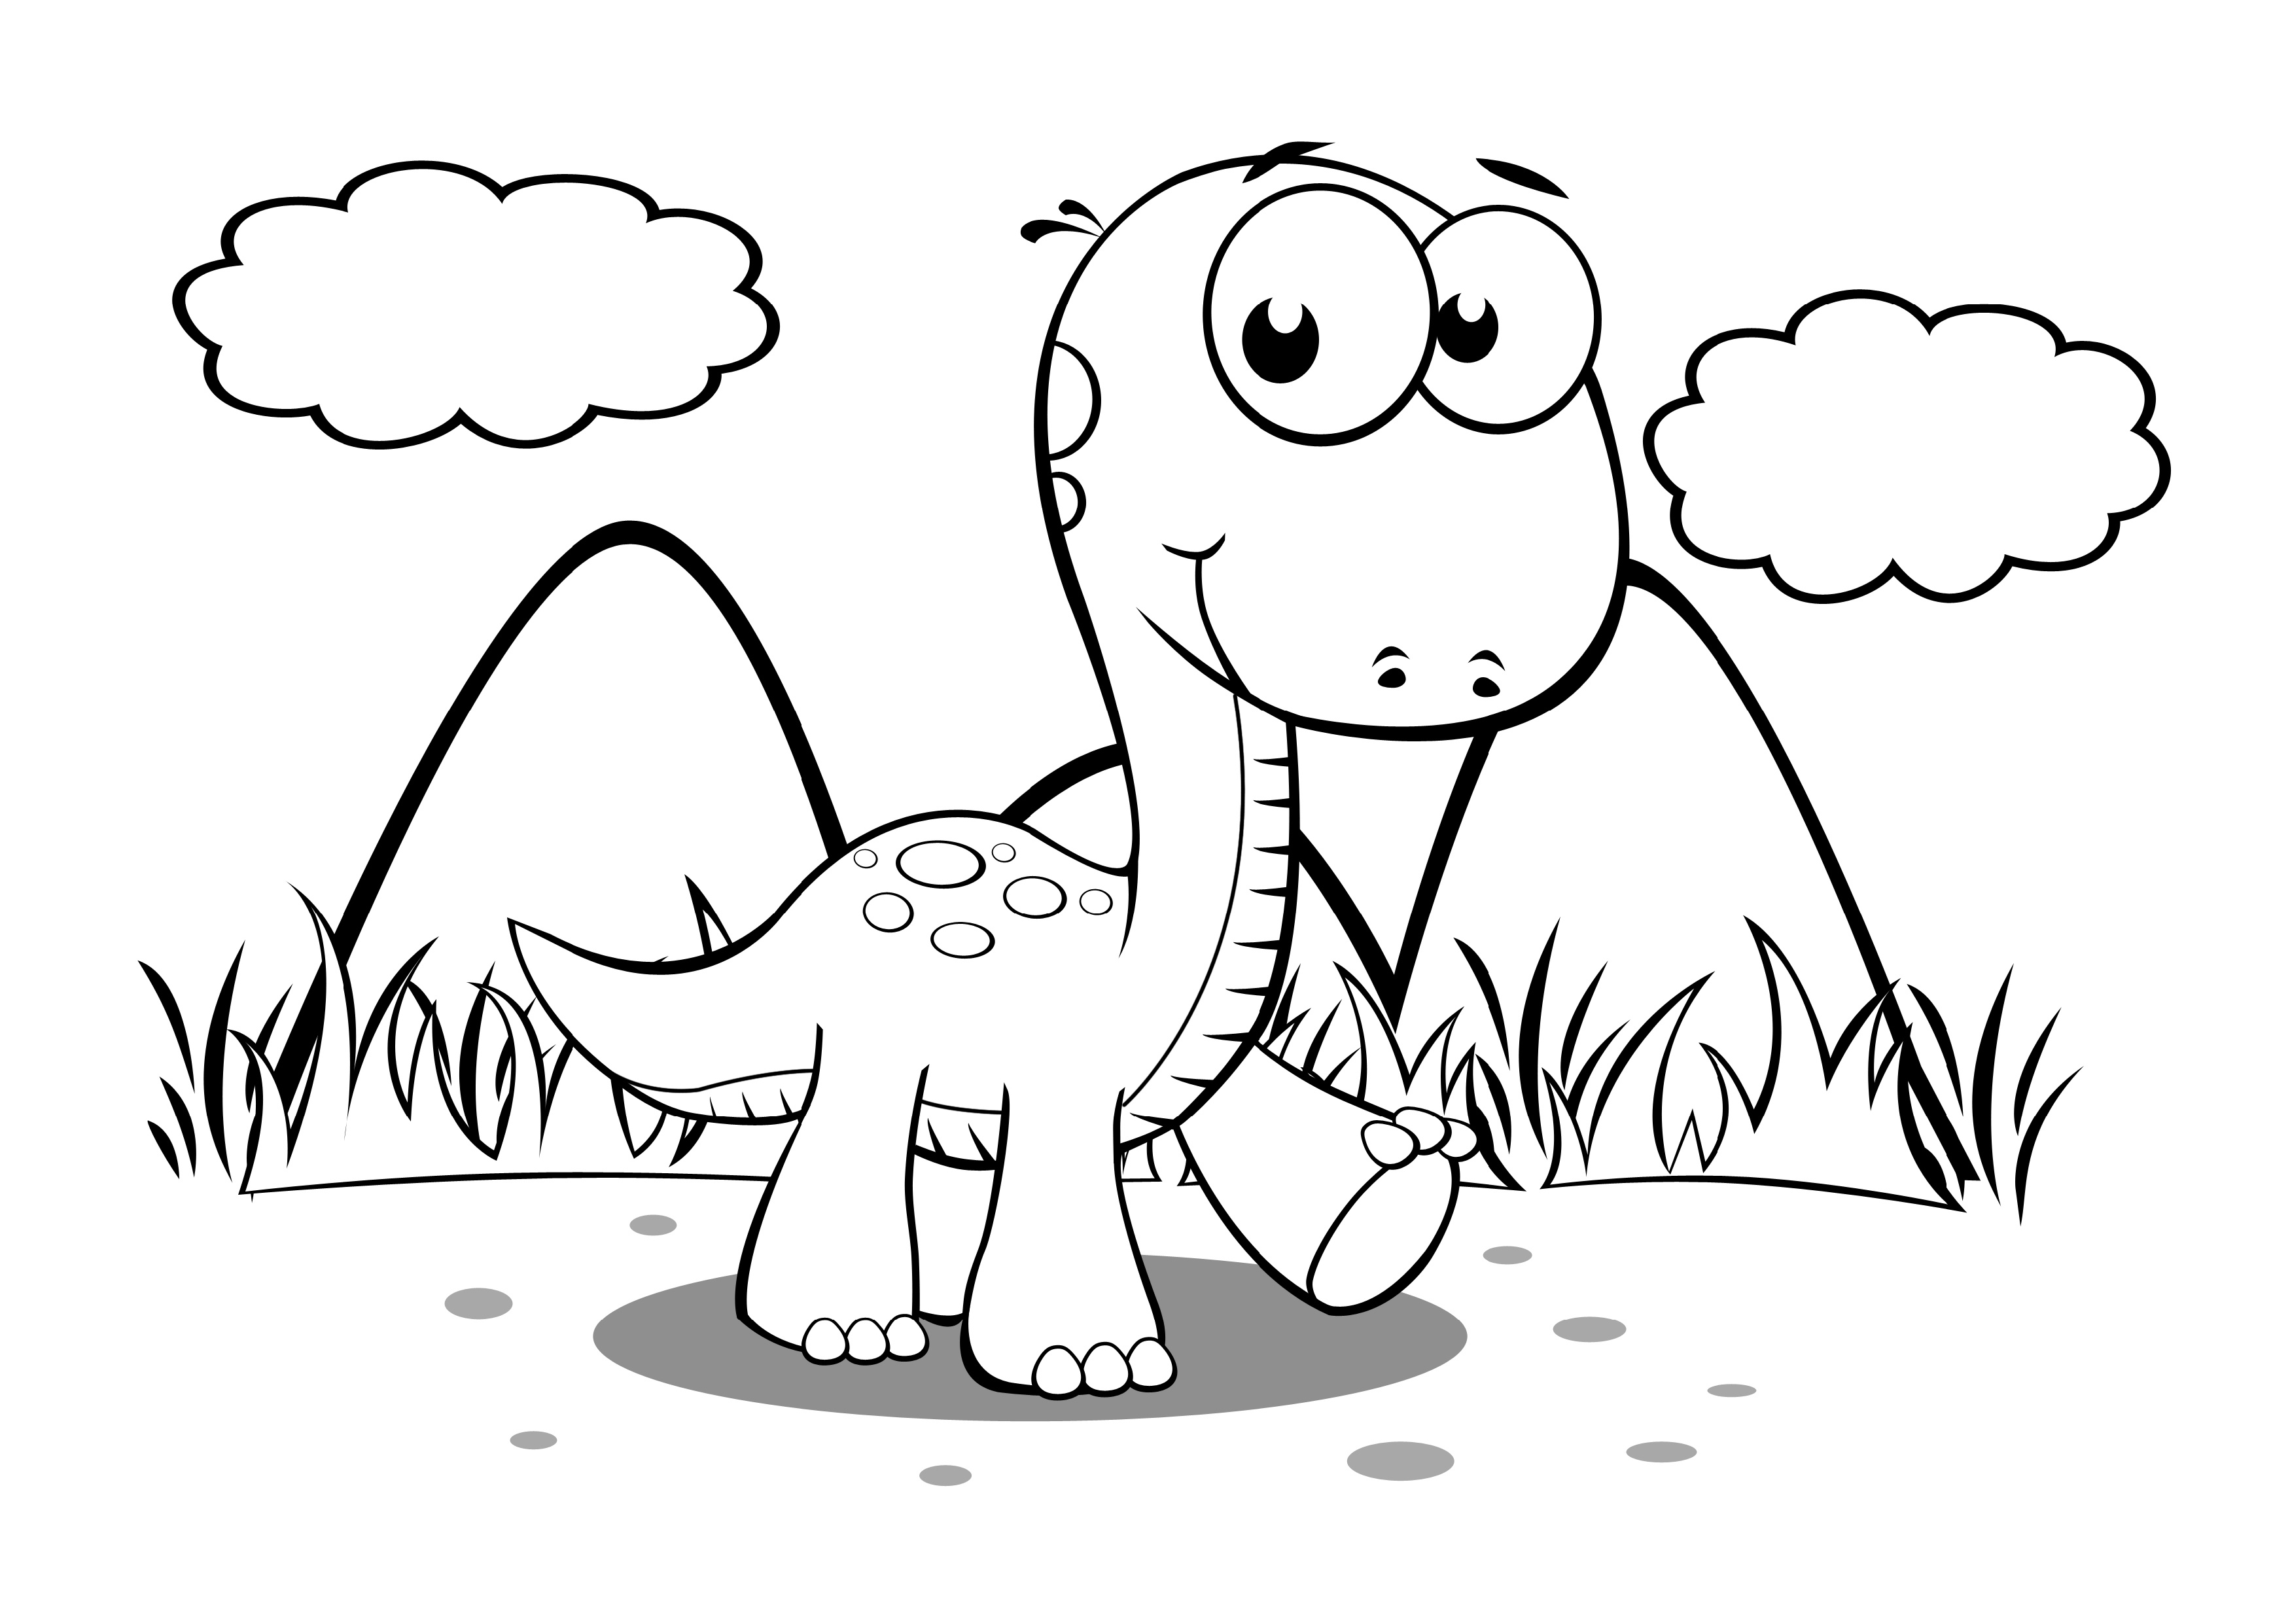 Baby Dinosaur Coloring Pages For Preschoolers Dinosaur Coloring Pages